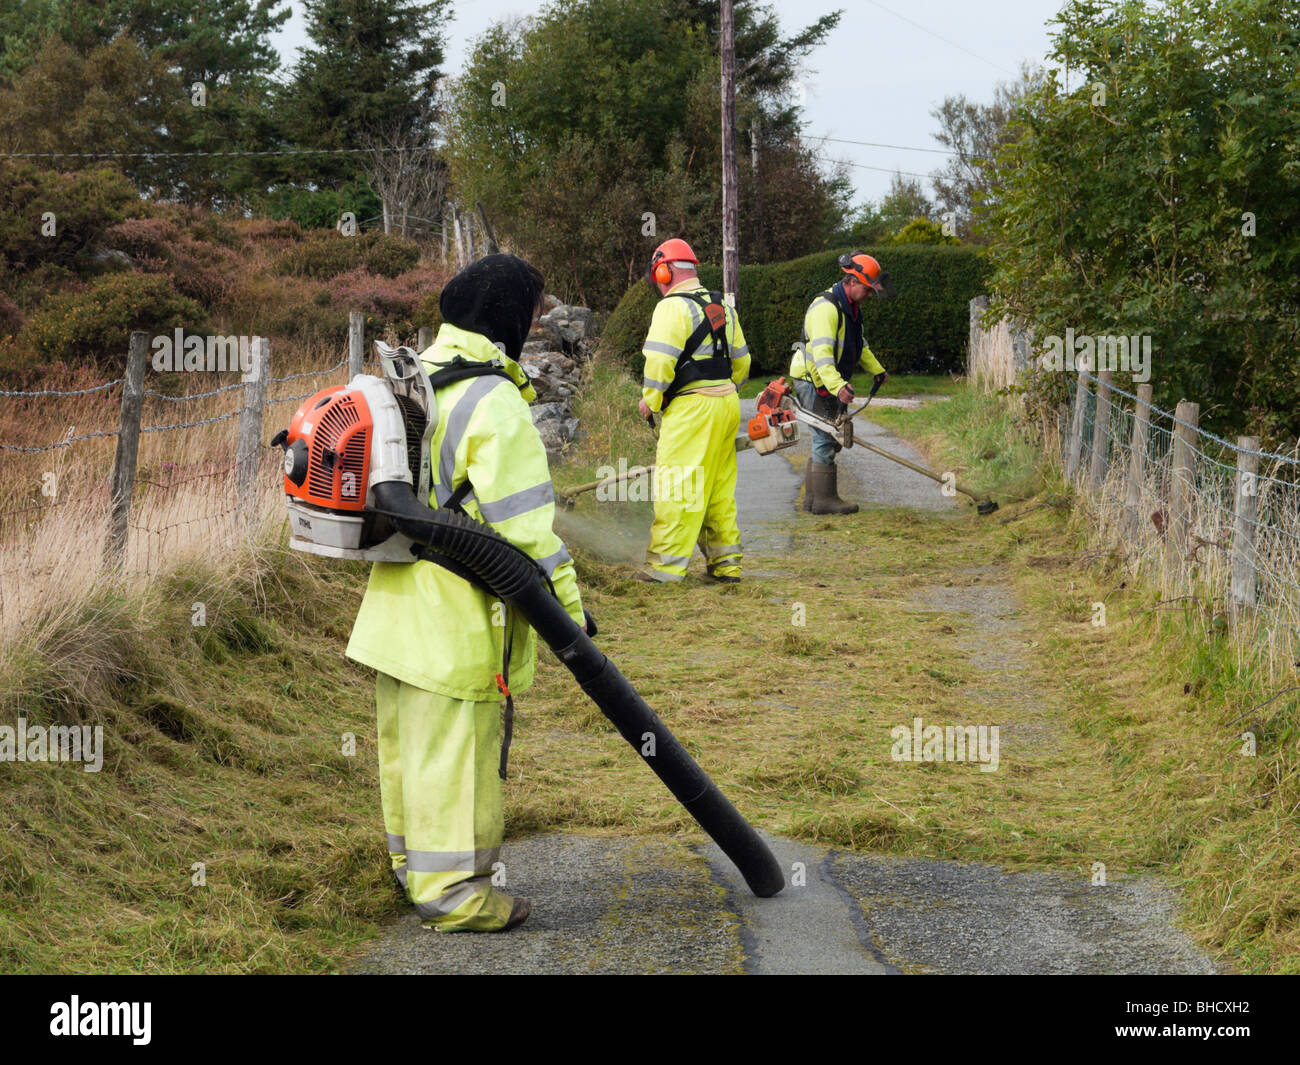 UK, Europe. Workmen wearing hi-visibility suits strimming a grass verge on a country lane Stock Photo